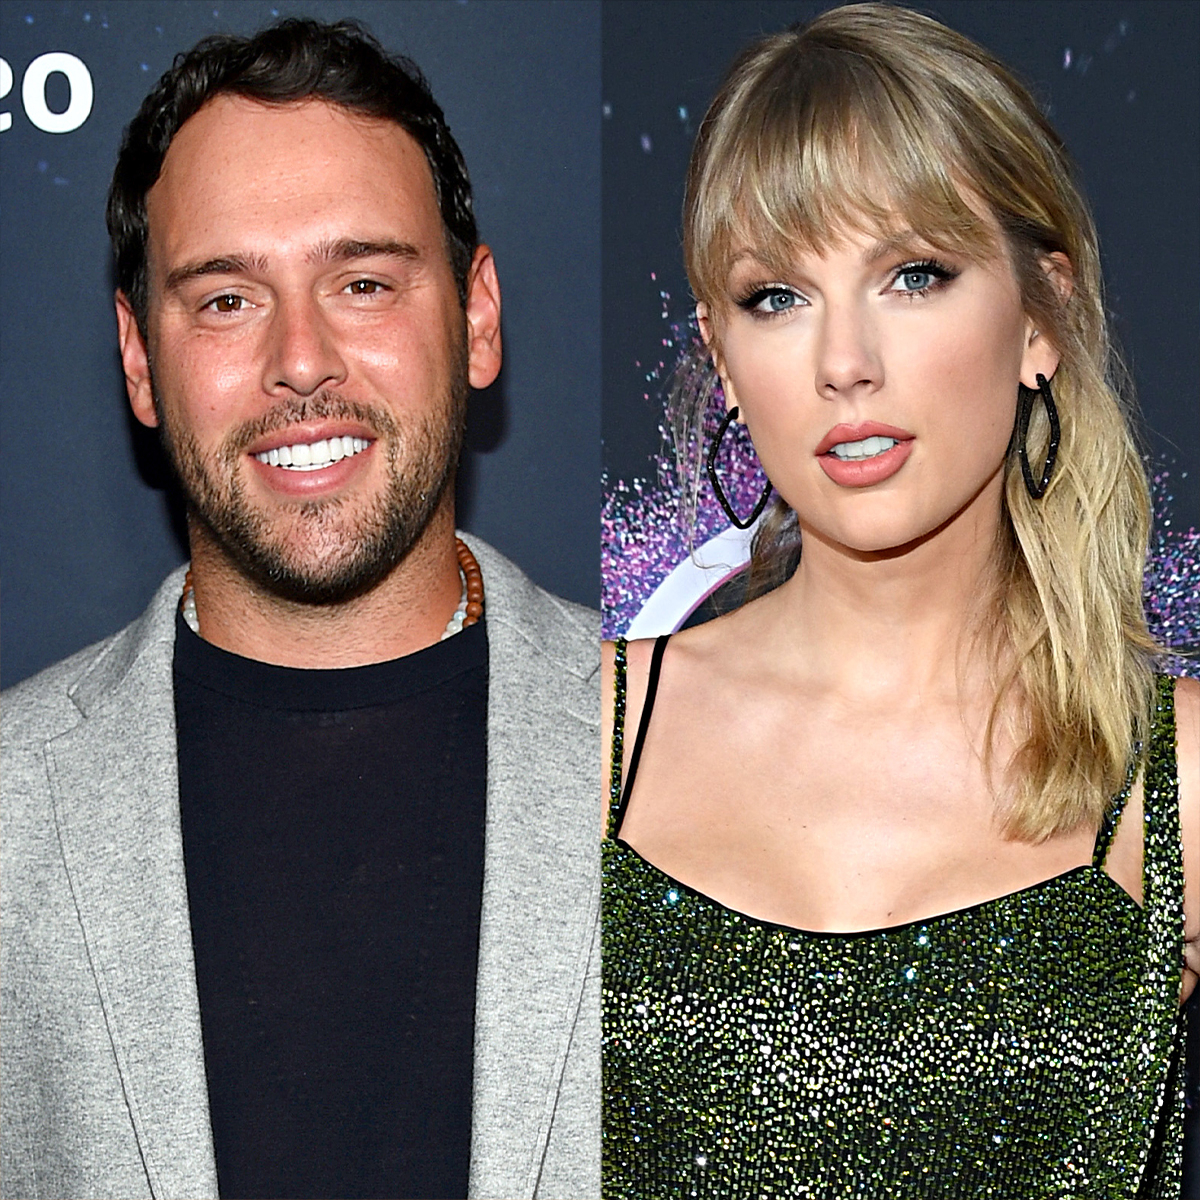 Scooter Braun Disagrees With "Weaponizing a Fanbase" Amid Feud - E! Online